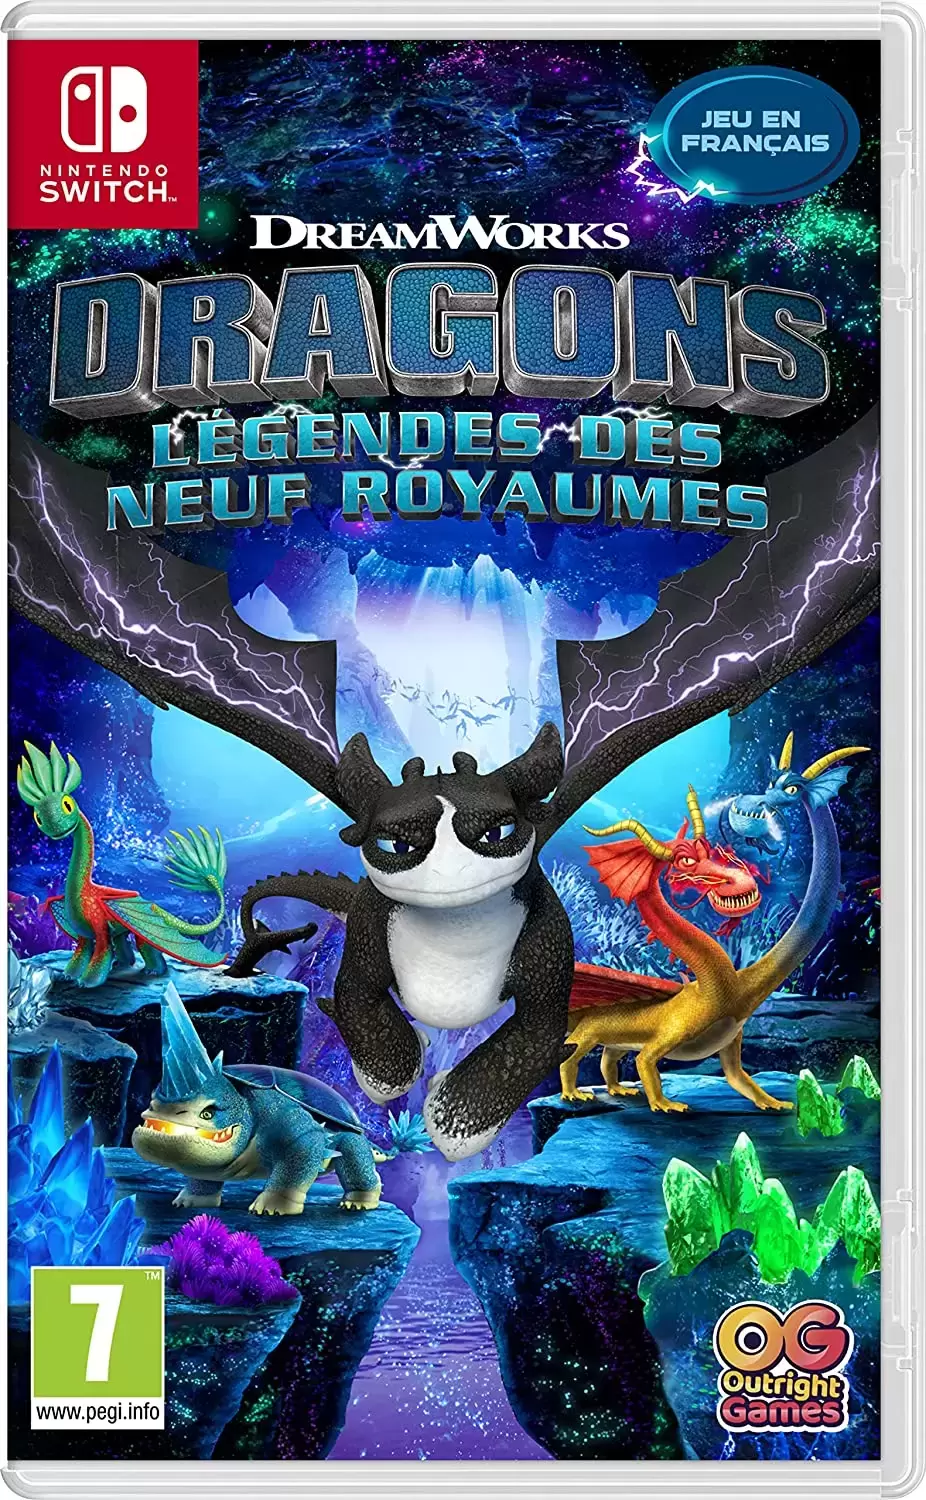 Nintendo Switch Games - Dragons Légendes Des Neuf Royaumes